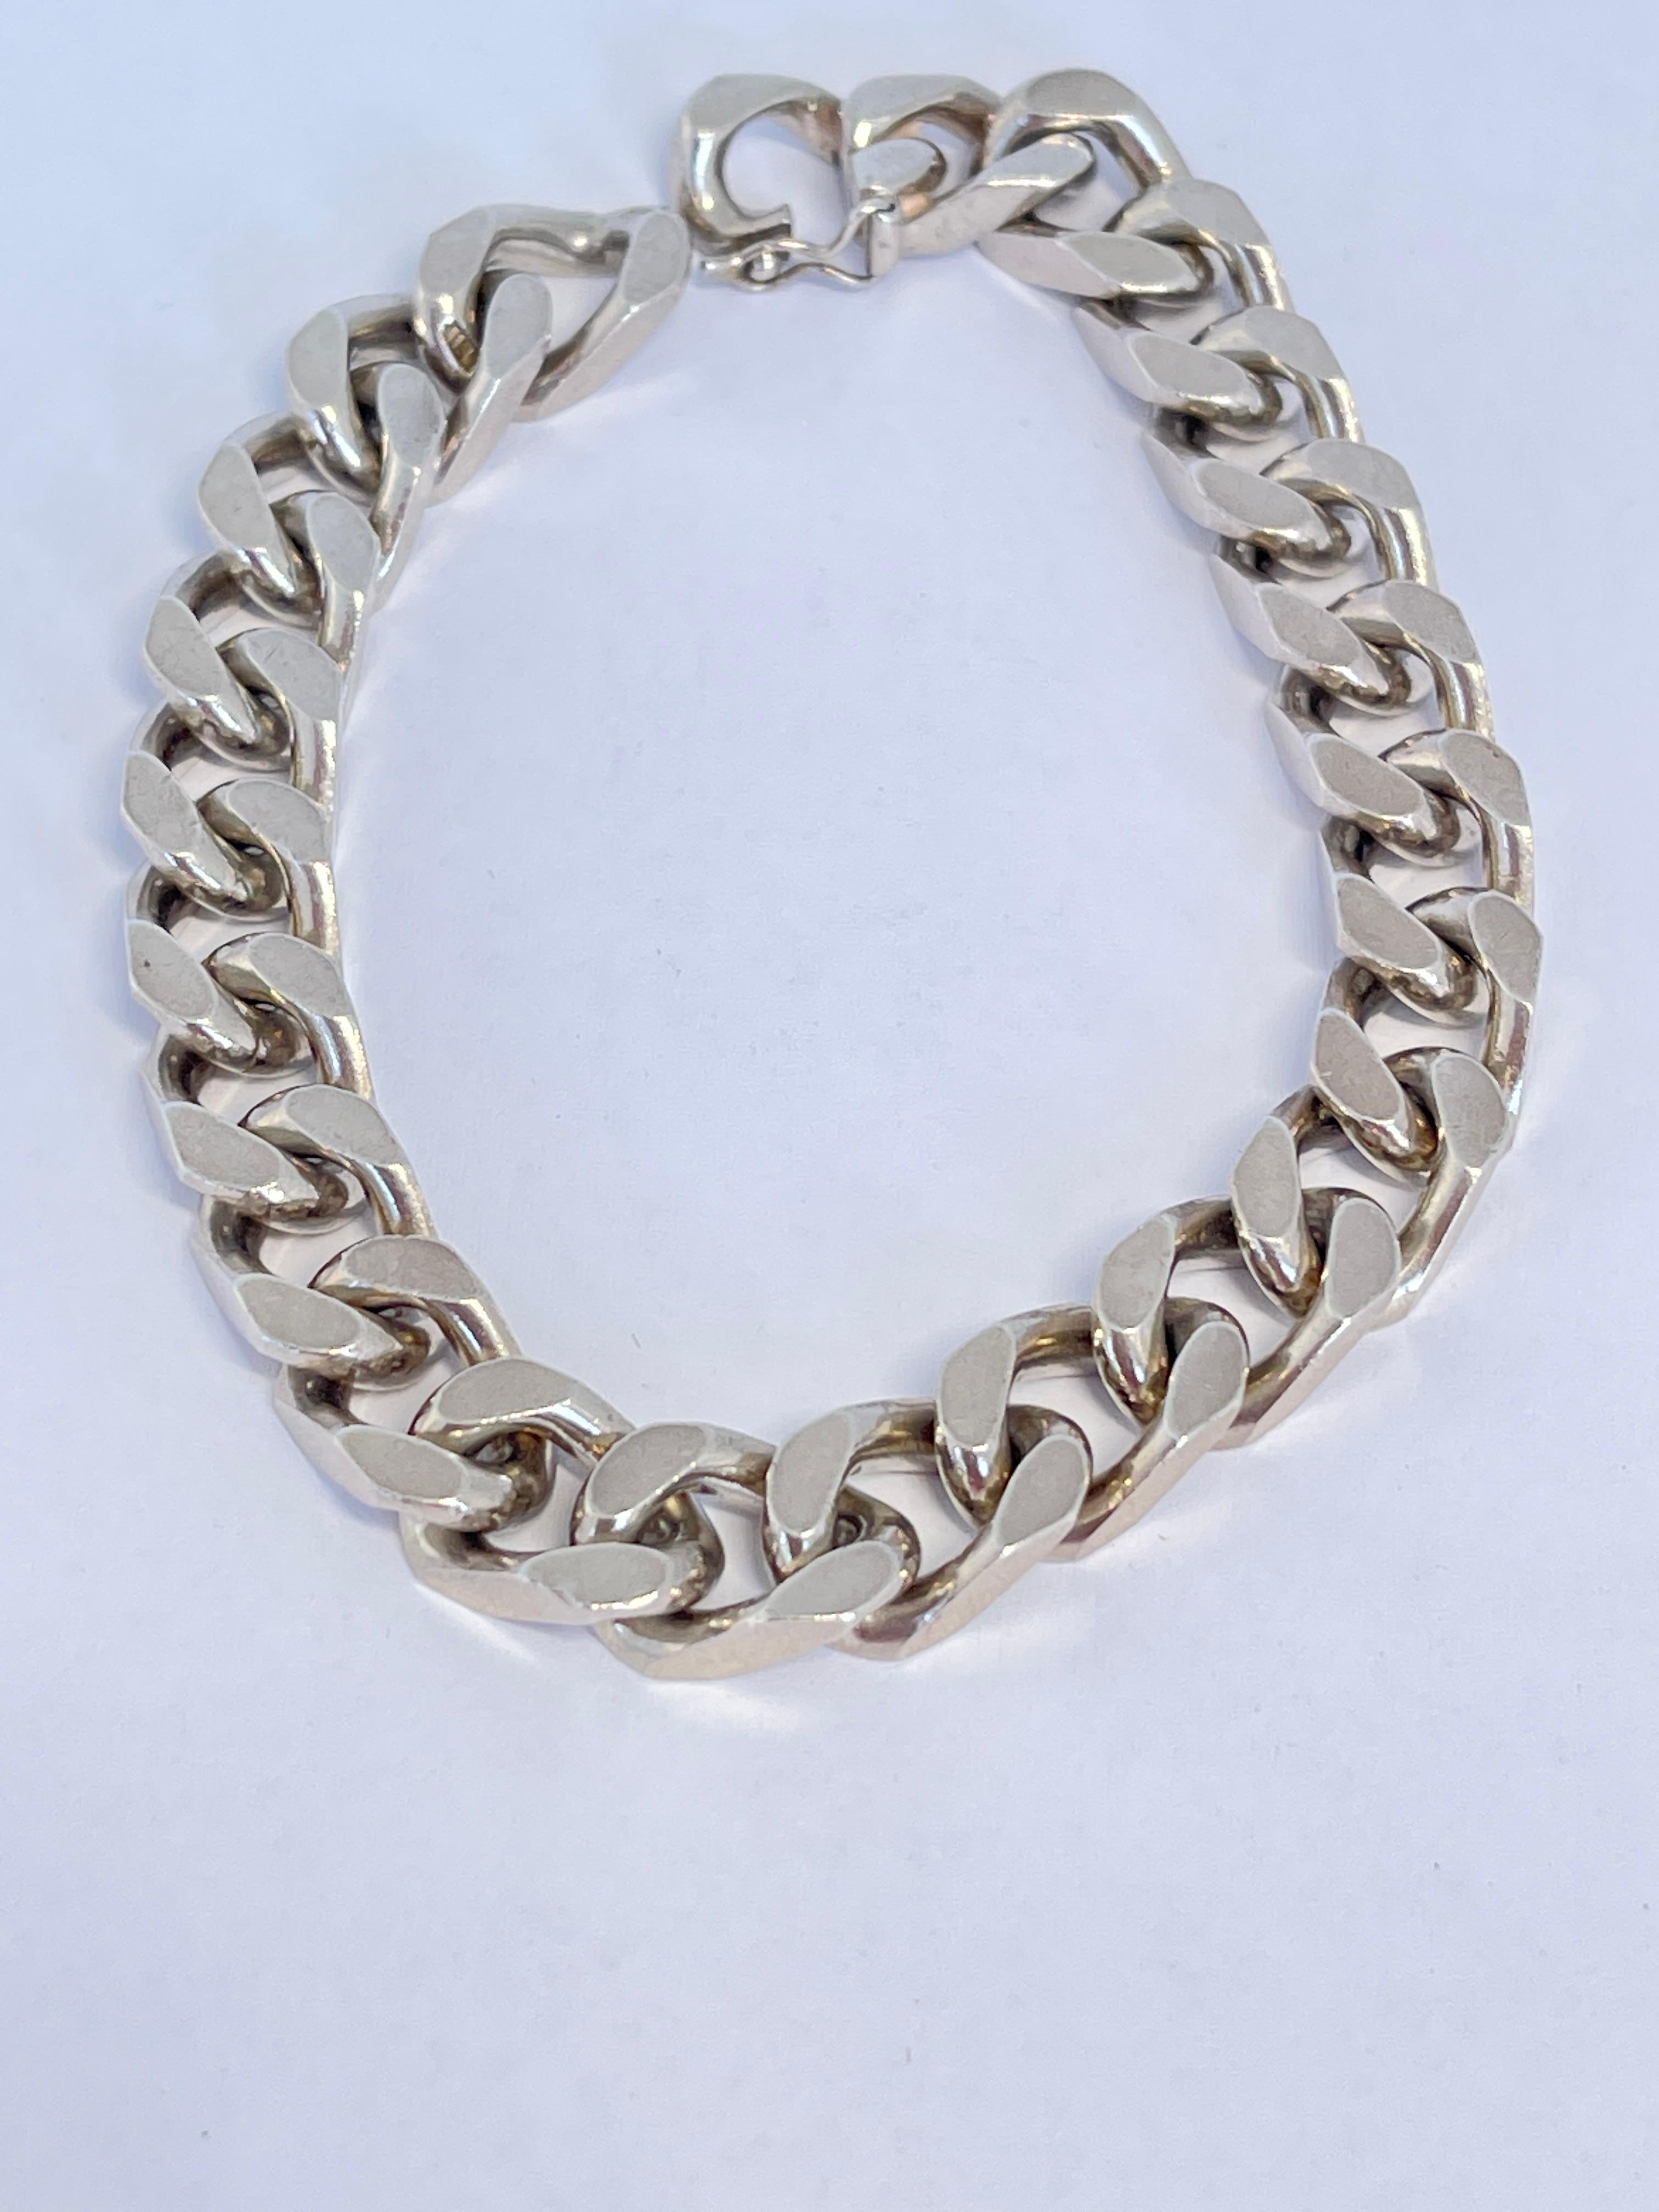 Vintage Solid Sterling Silver Gents Bracelet by Leif Jorgensen Denmark Hallmarks In Good Condition For Sale In Mona Vale, NSW